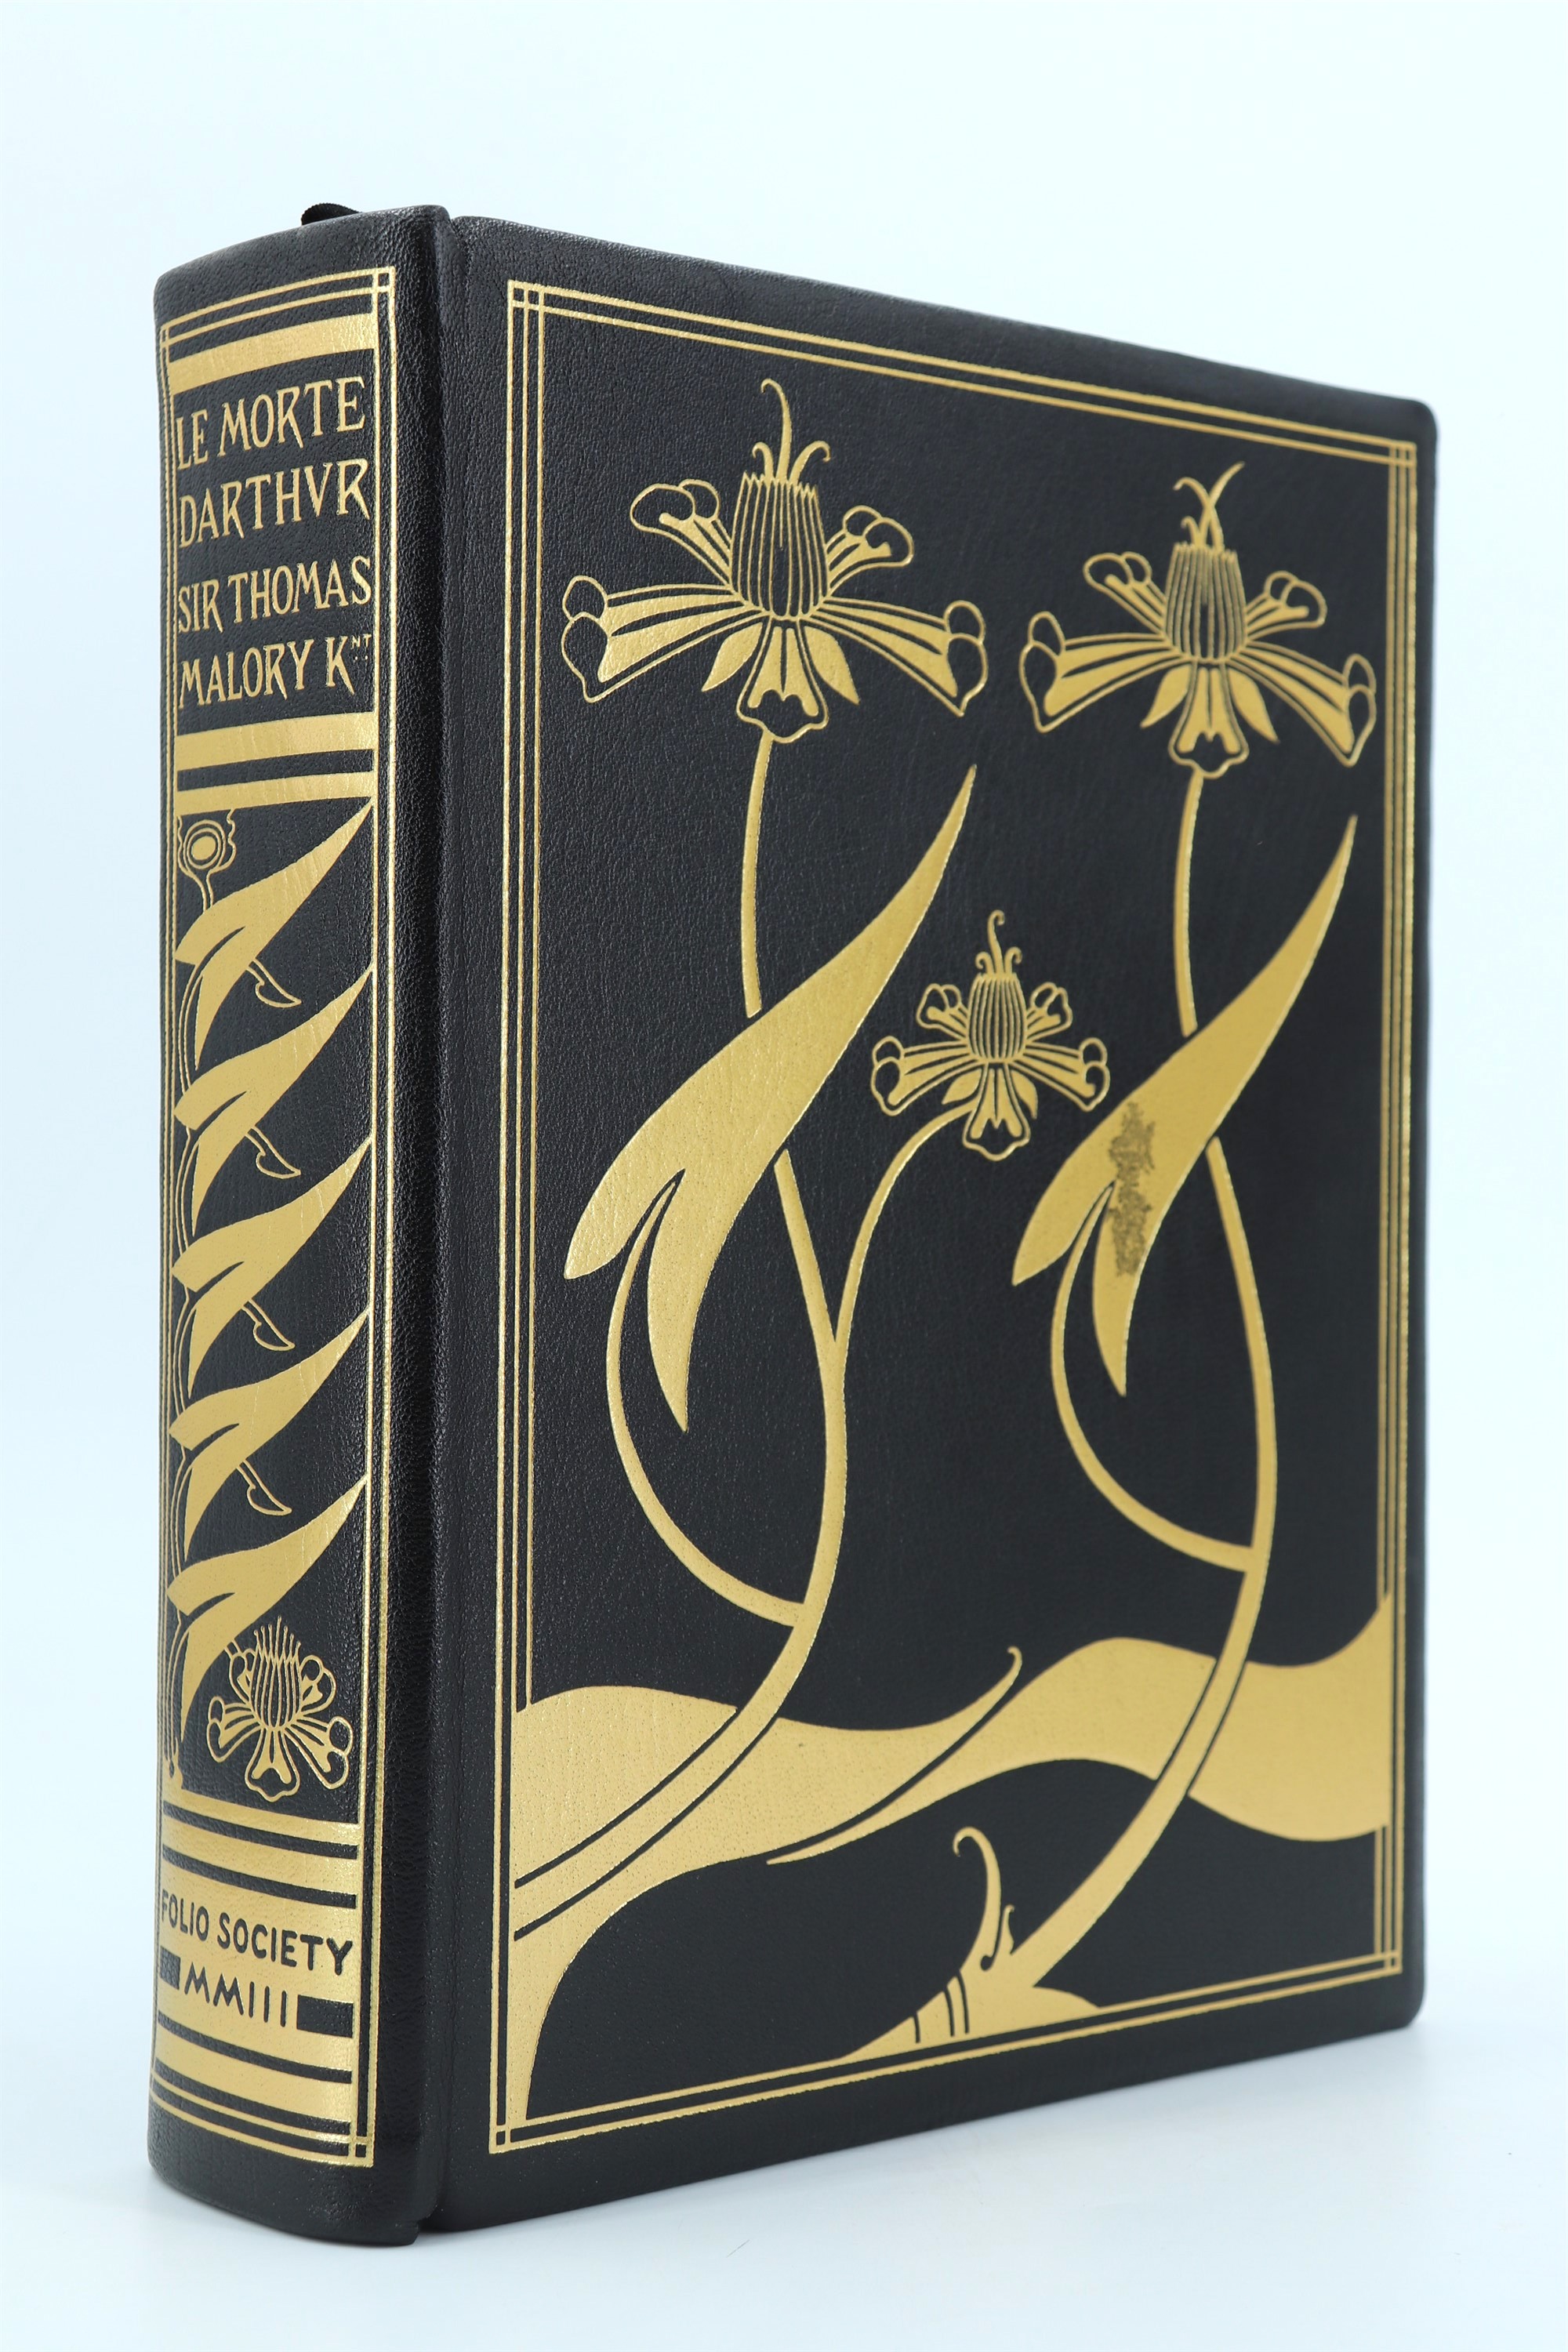 A Folio Society edition of Sir Thomas Mallory, "Le Mort D'Arthur", illustrated by Aubrey - Image 3 of 5